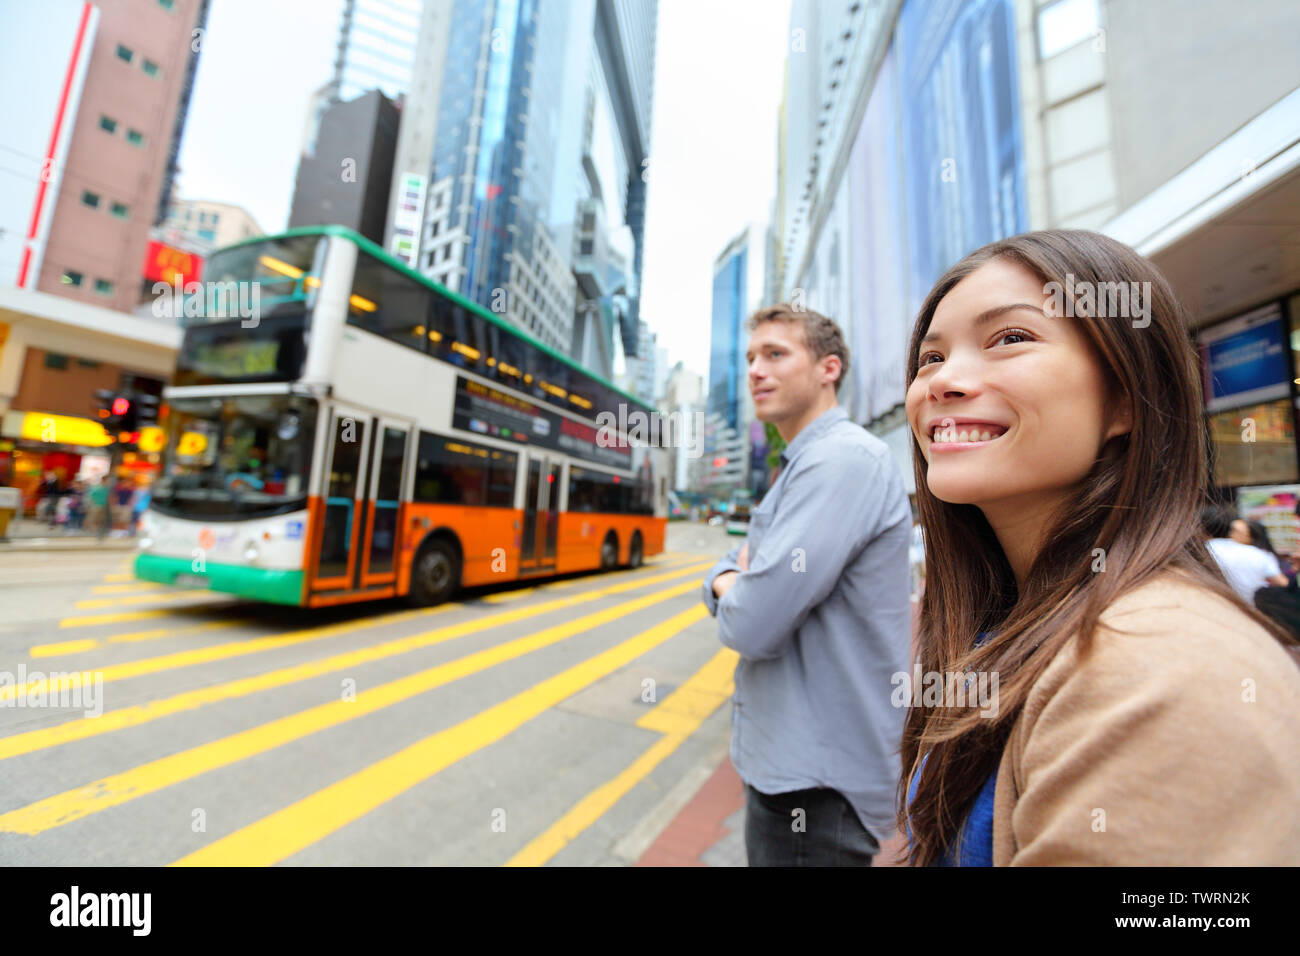 Hong Kong People walking in Causeway Bay crossing busy road with double decker bus. Urban mixed race Asian Chinese / Caucasian woman smiling happy living in city. Stock Photo